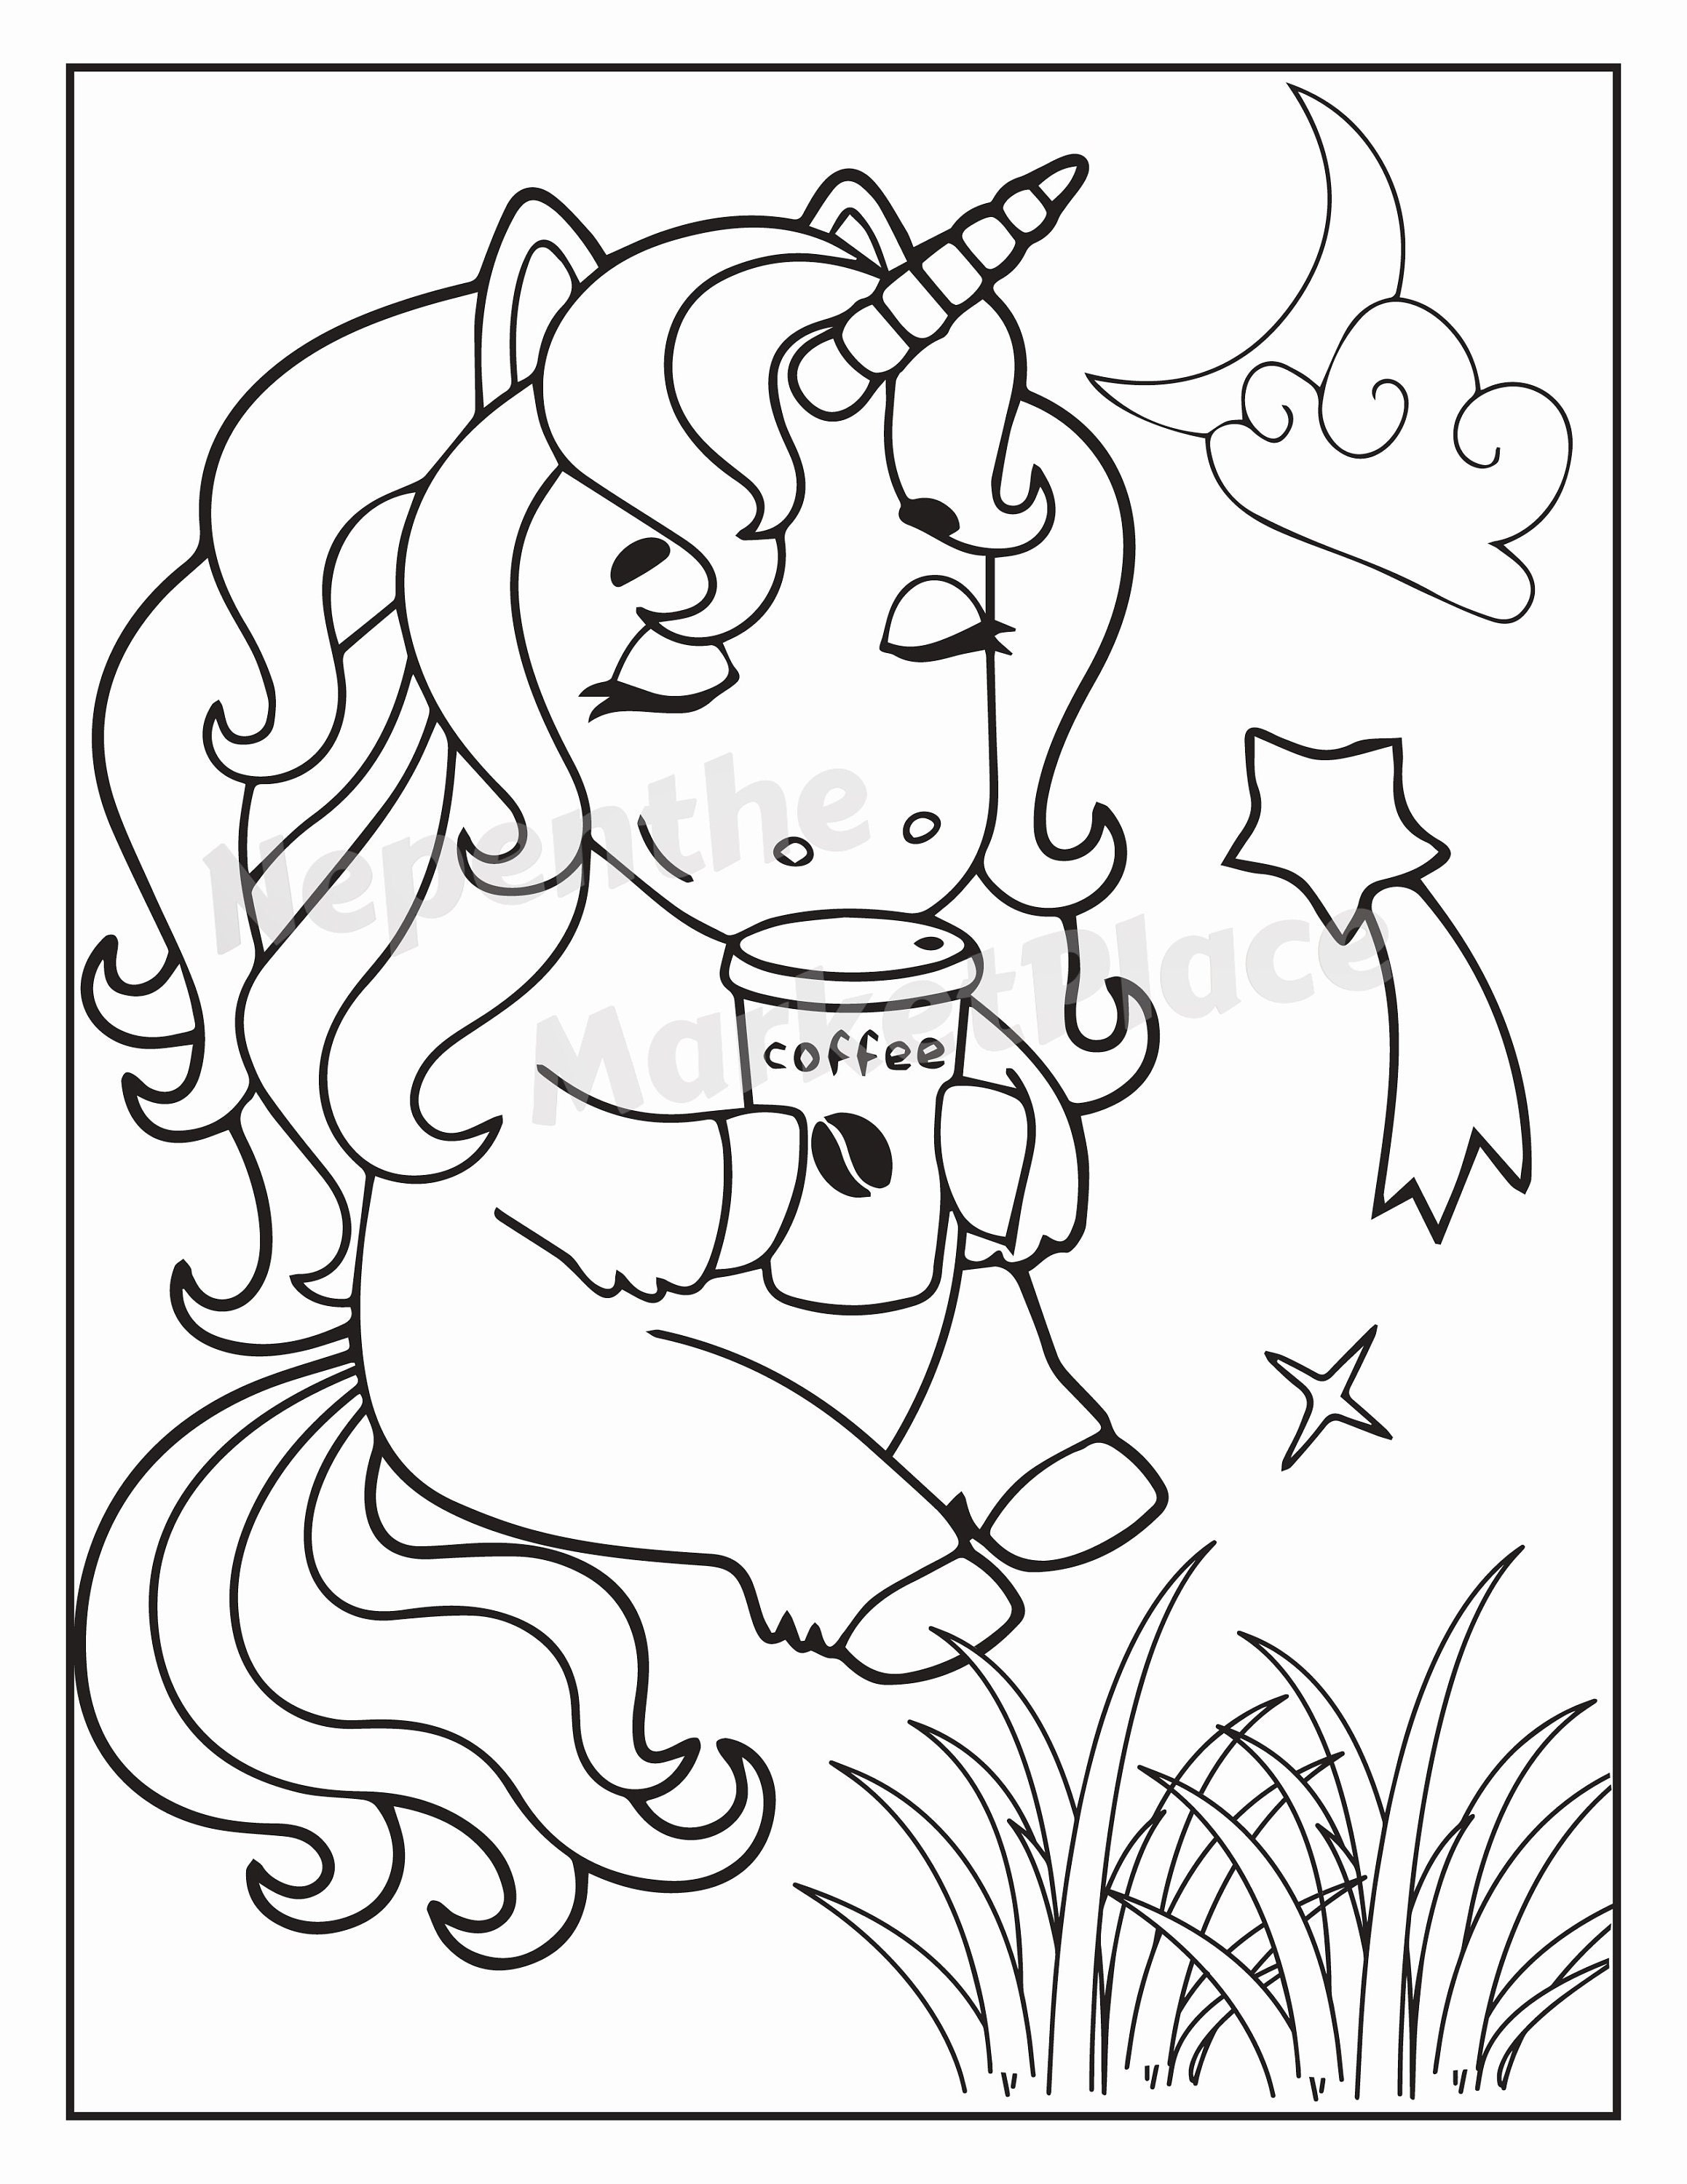 coloring-book-pages-digital-and-printable-coloring-book-pages-etsy